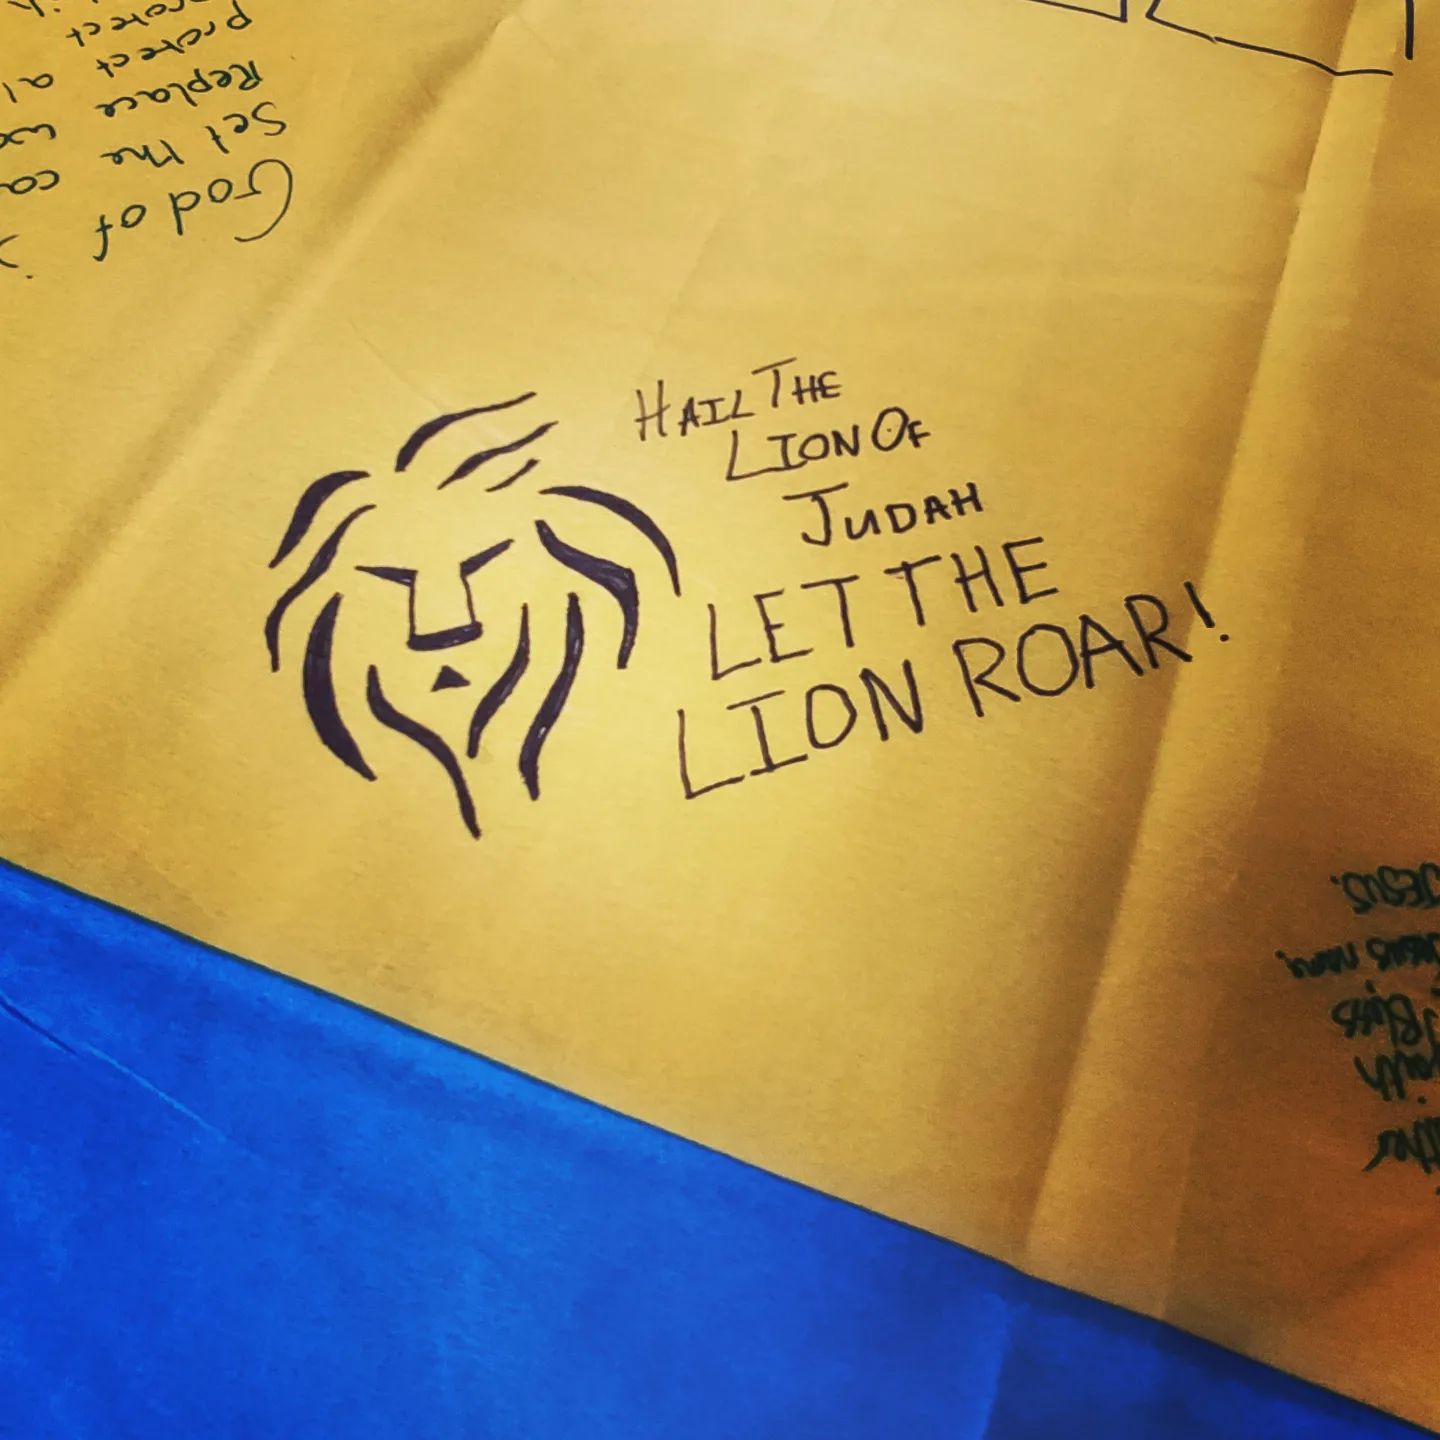 We've had a Ukrainian flag in the dining room at @trinity_bristol that folks have been decorating with prayers.Not knowing quite what or how to begin to pray, I was really encouraged with the @elevationworship "Lion" album and the title track. A simple reminder of the sovereignty, glory and justice of God. So that is what I prayed... #LetTheLionRoar #prayforukraine #prayforpeace